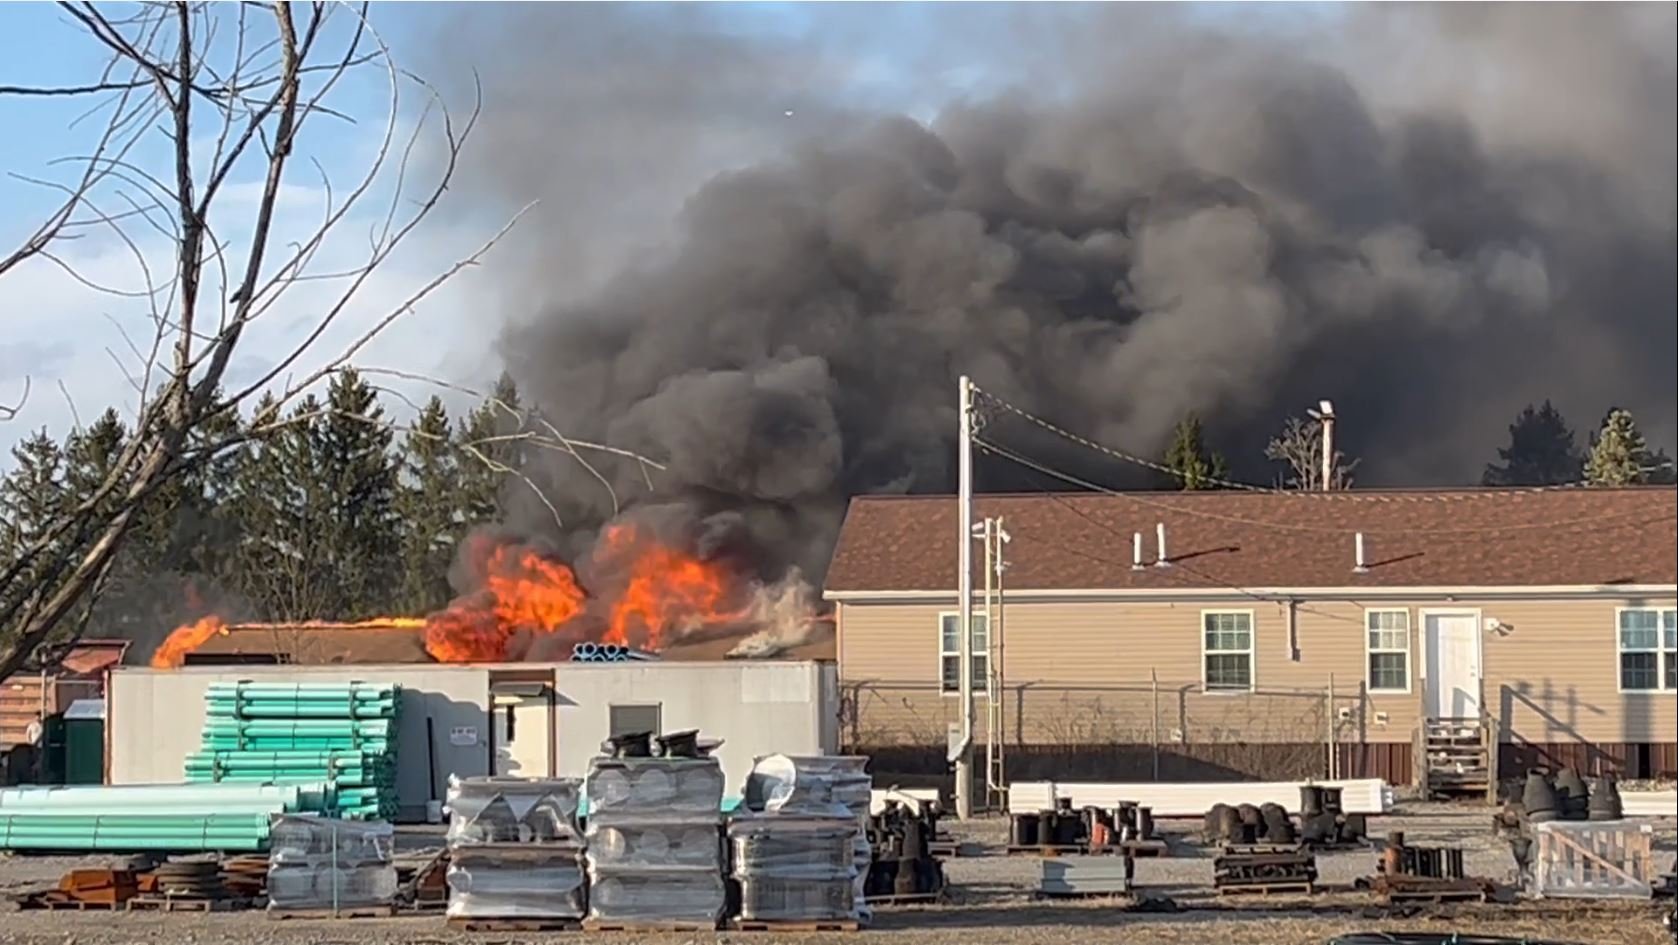 Fire at St. Clair Township business extinguished, road closure in effect – Update